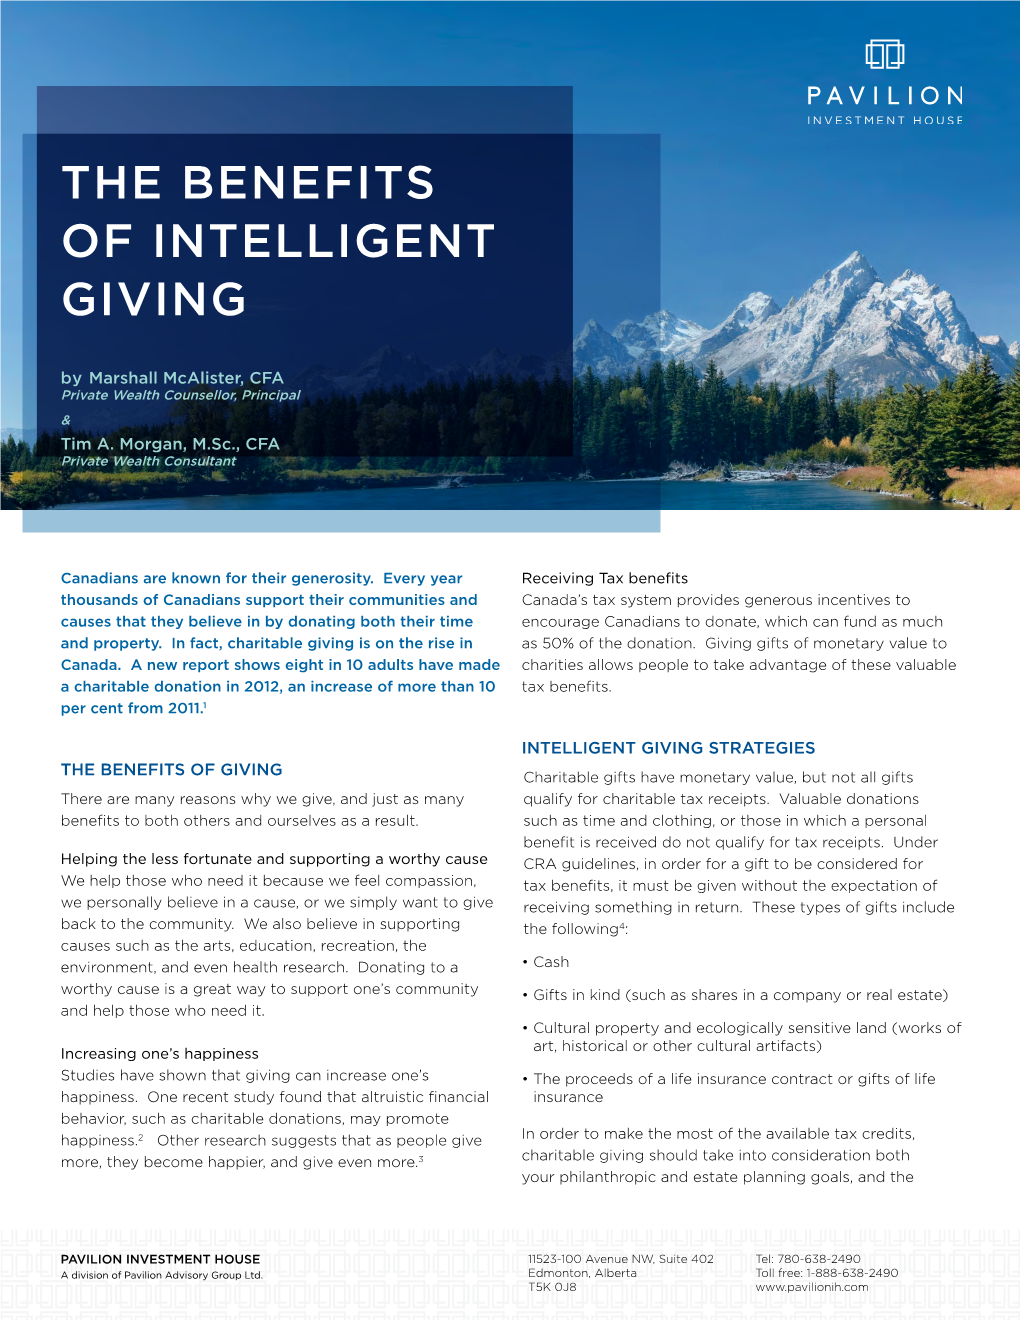 The Benefits of Intelligent Giving by Marshall Mcalister, CFA Private Wealth Counsellor, Principal & Tim A